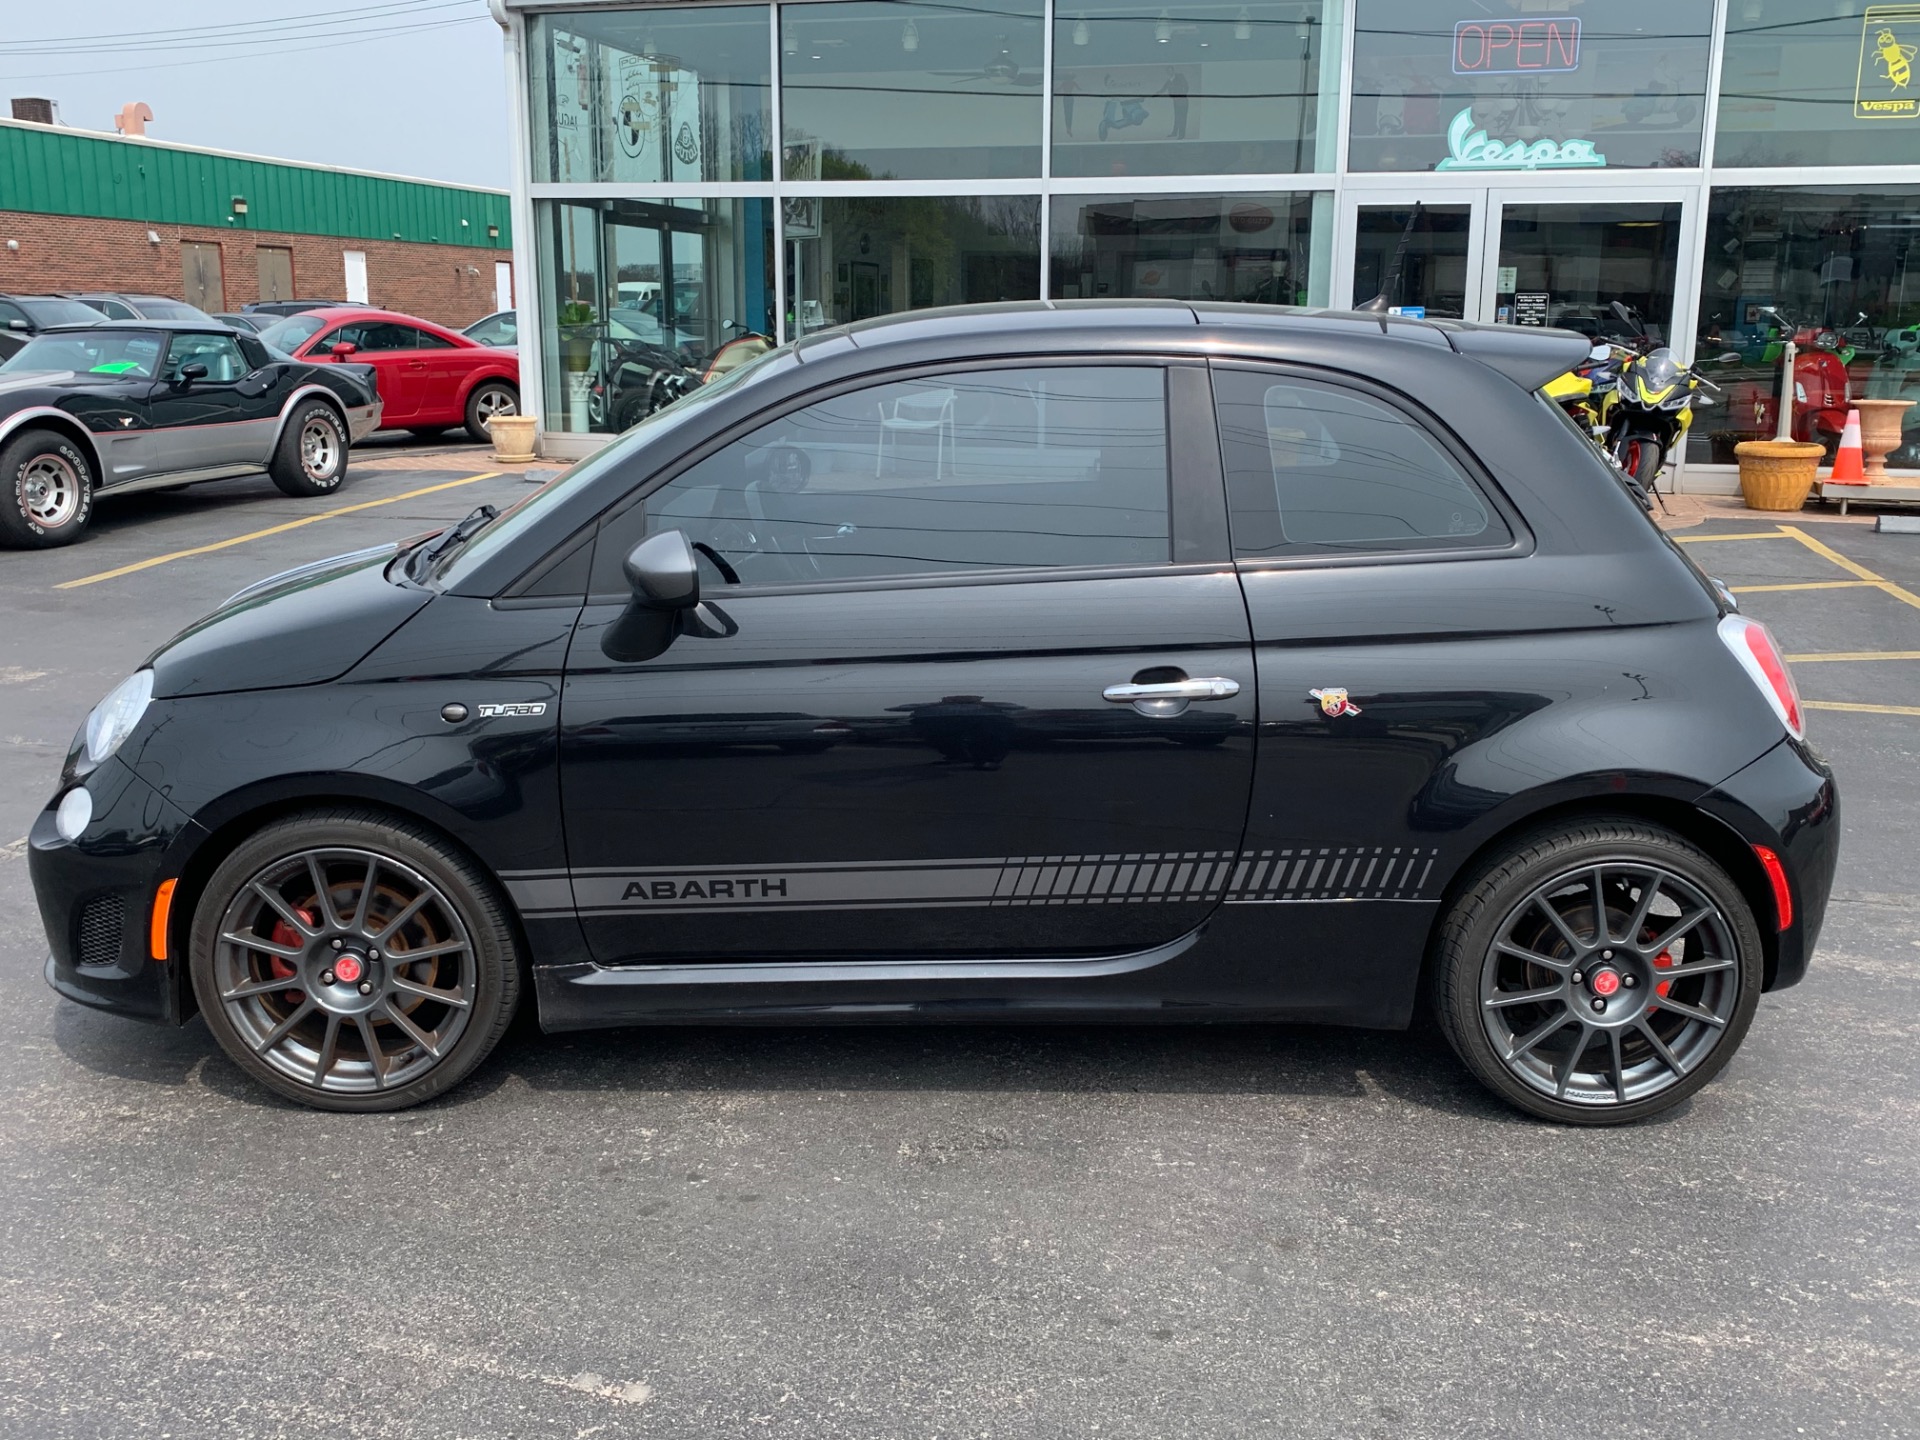 2013 FIAT 500 Abarth Stock 4001 for sale near Brookfield